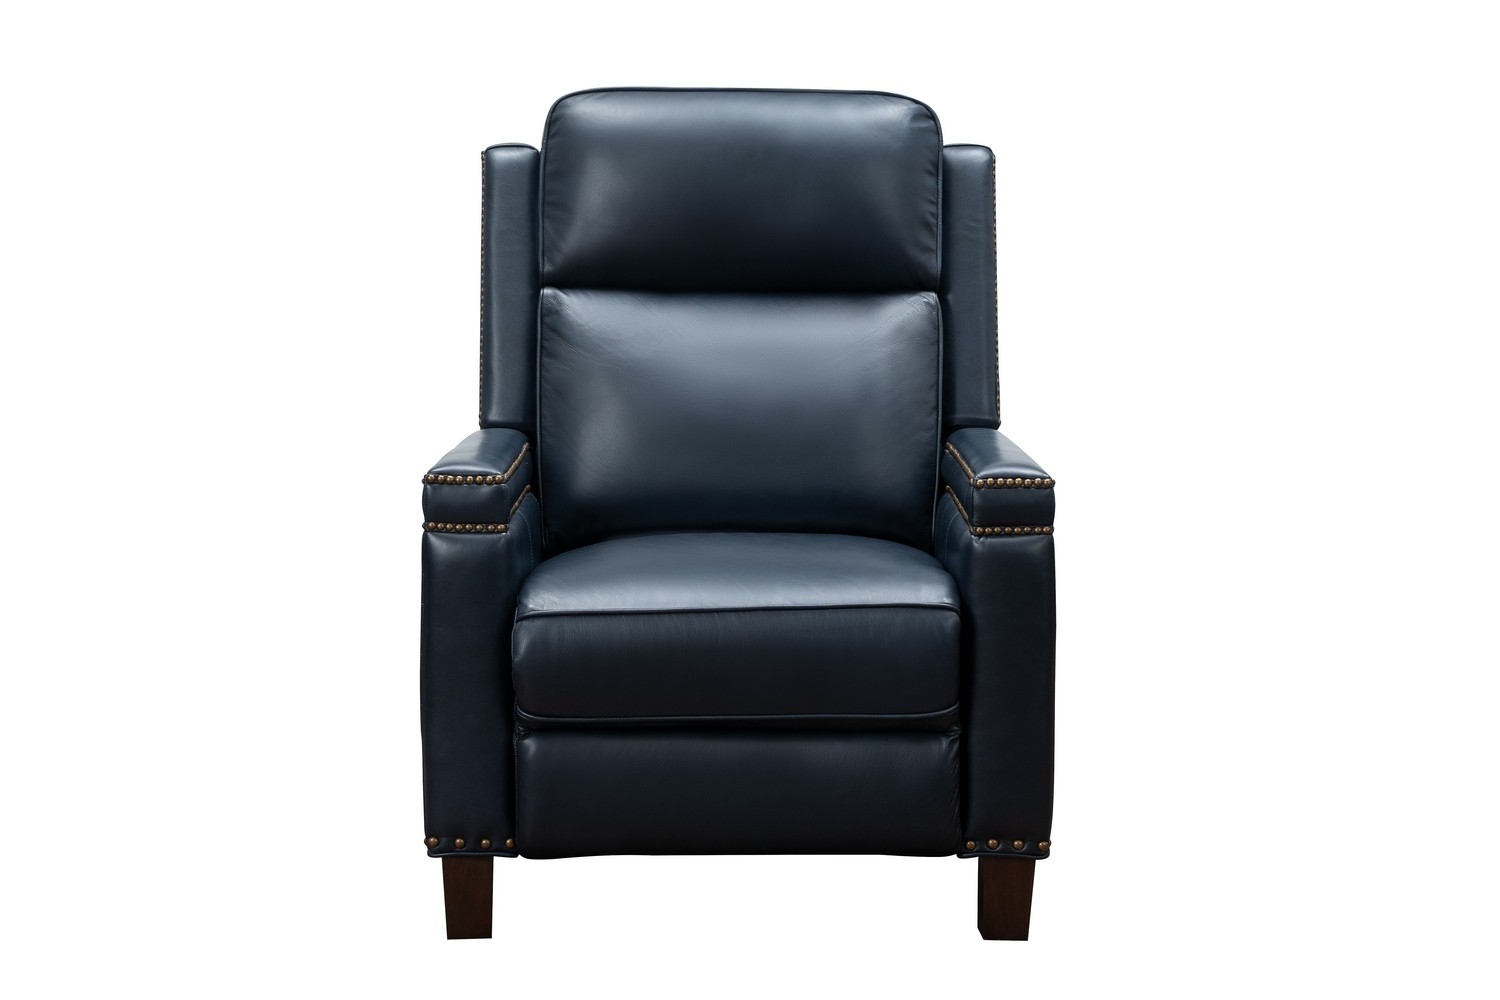 Barcalounger Smithfield Big and Tall Recliner Chair - Shoreham Blue/All Leather